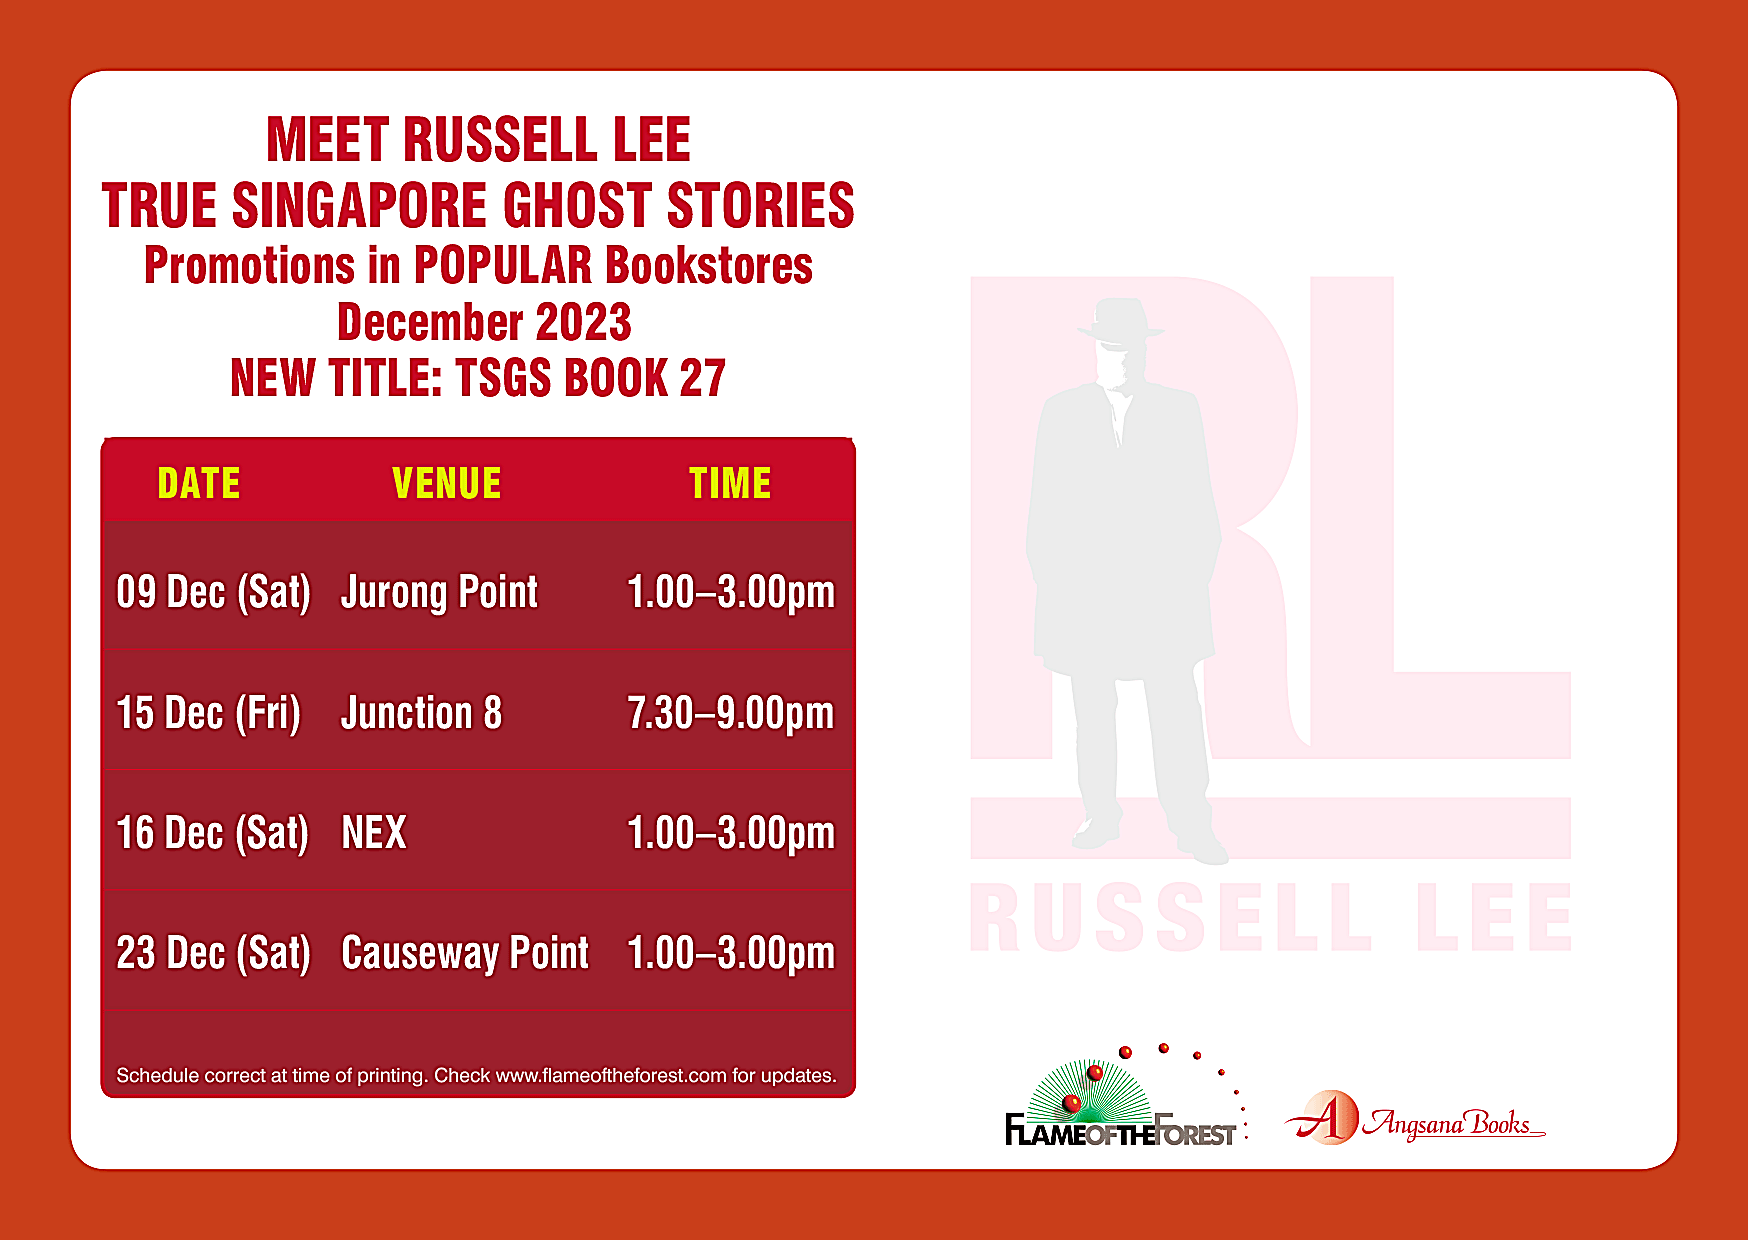 TRUE SINGAPORE GHOST STORIES EVENTS